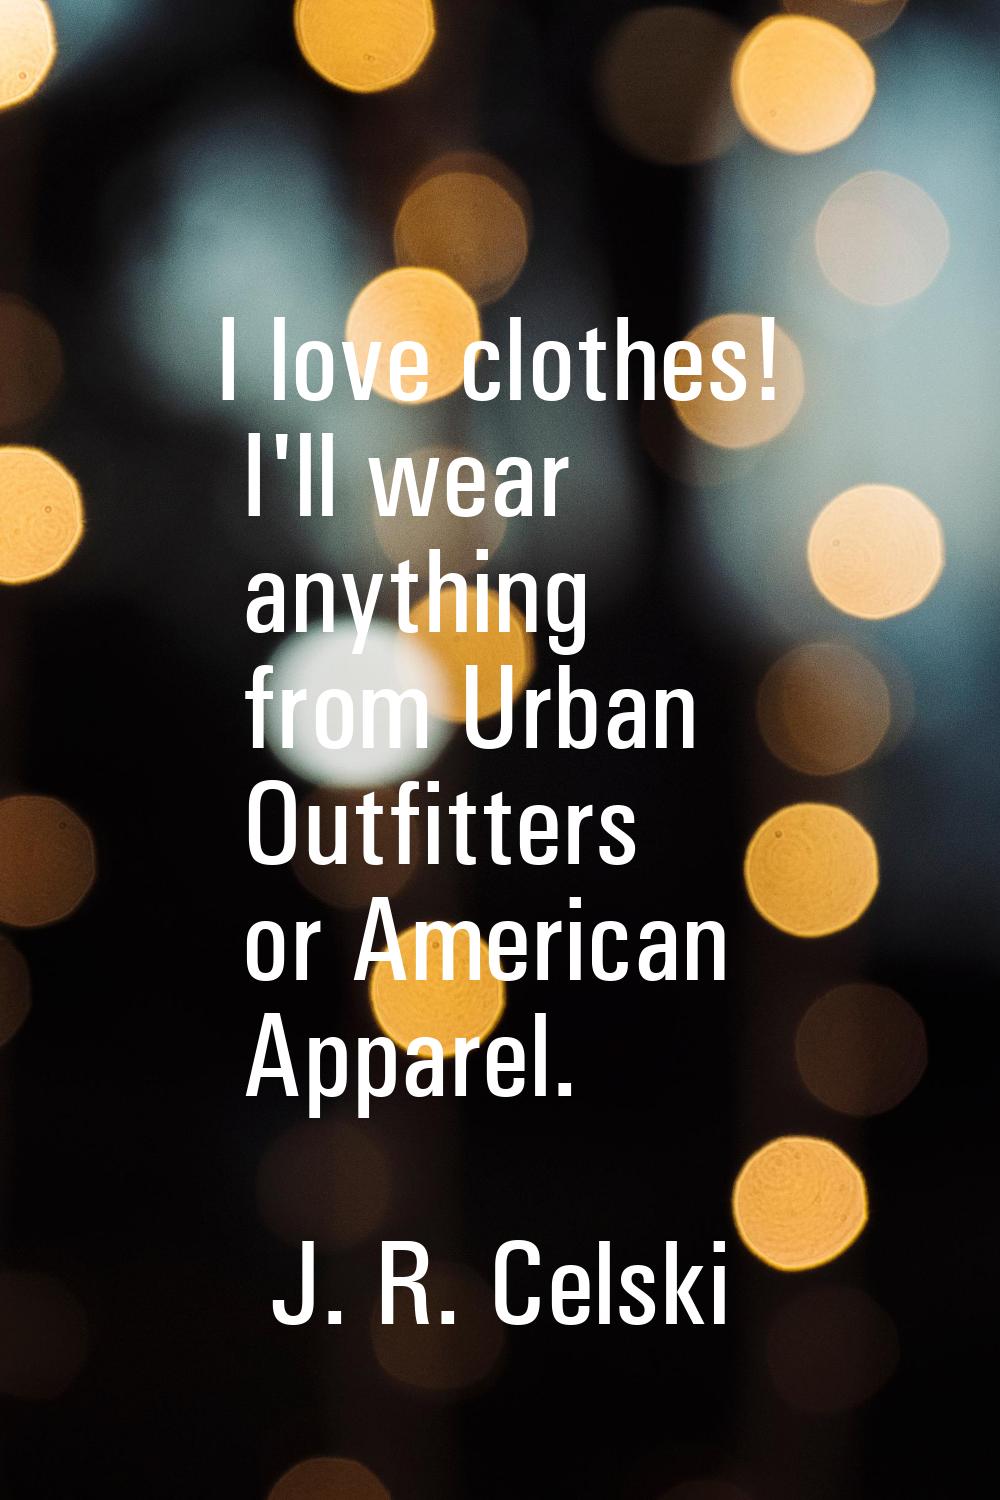 I love clothes! I'll wear anything from Urban Outfitters or American Apparel.